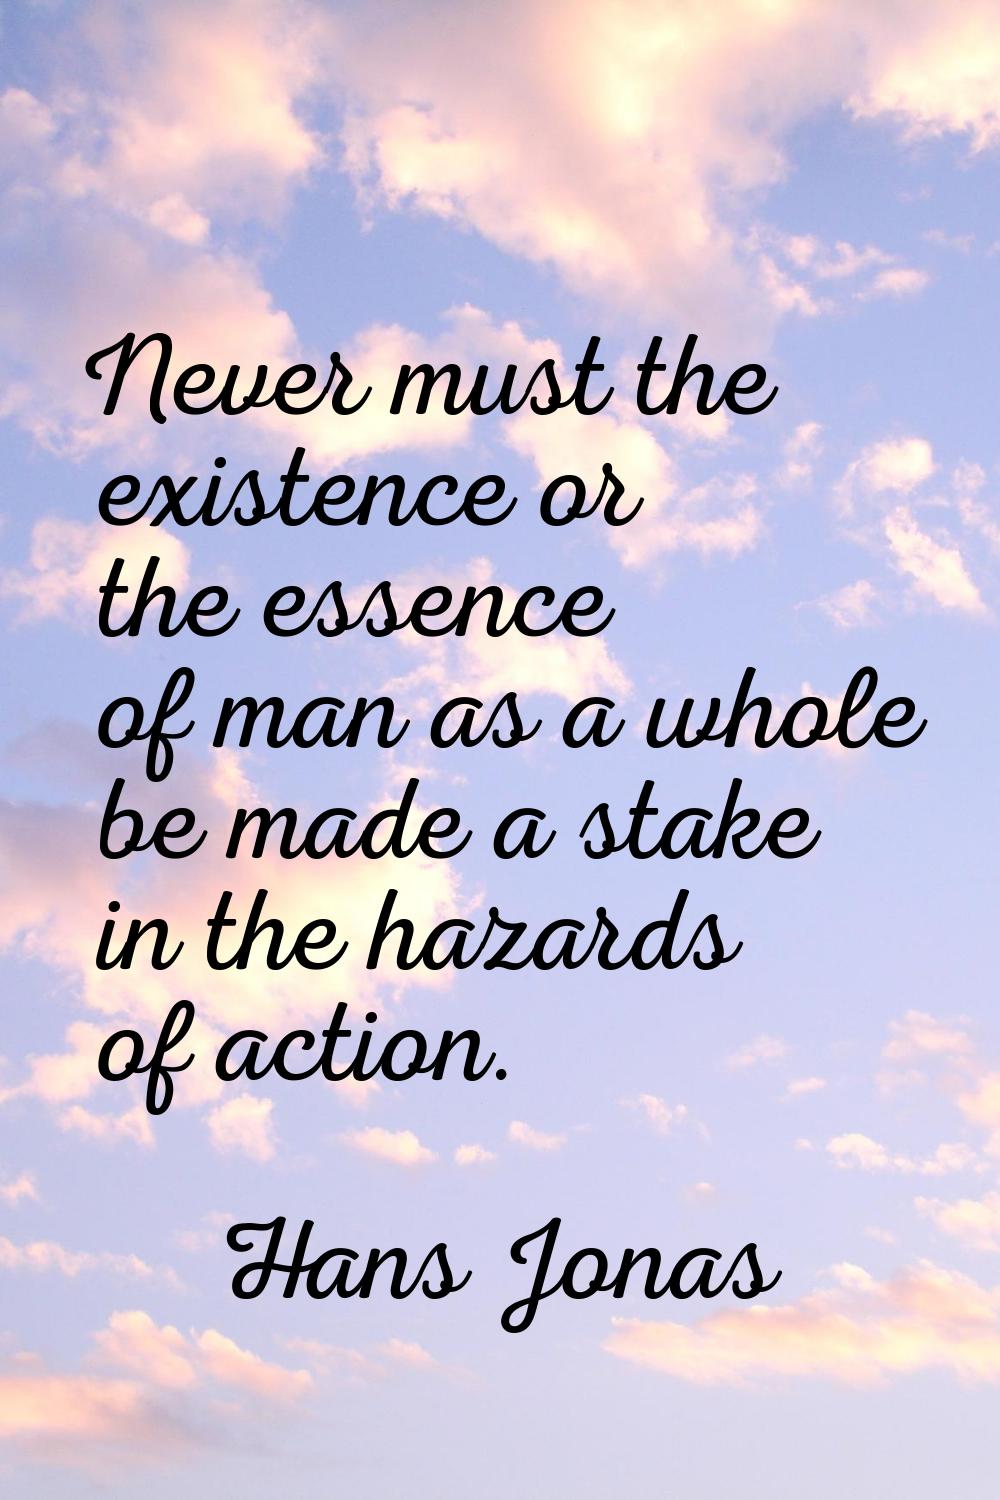 Never must the existence or the essence of man as a whole be made a stake in the hazards of action.